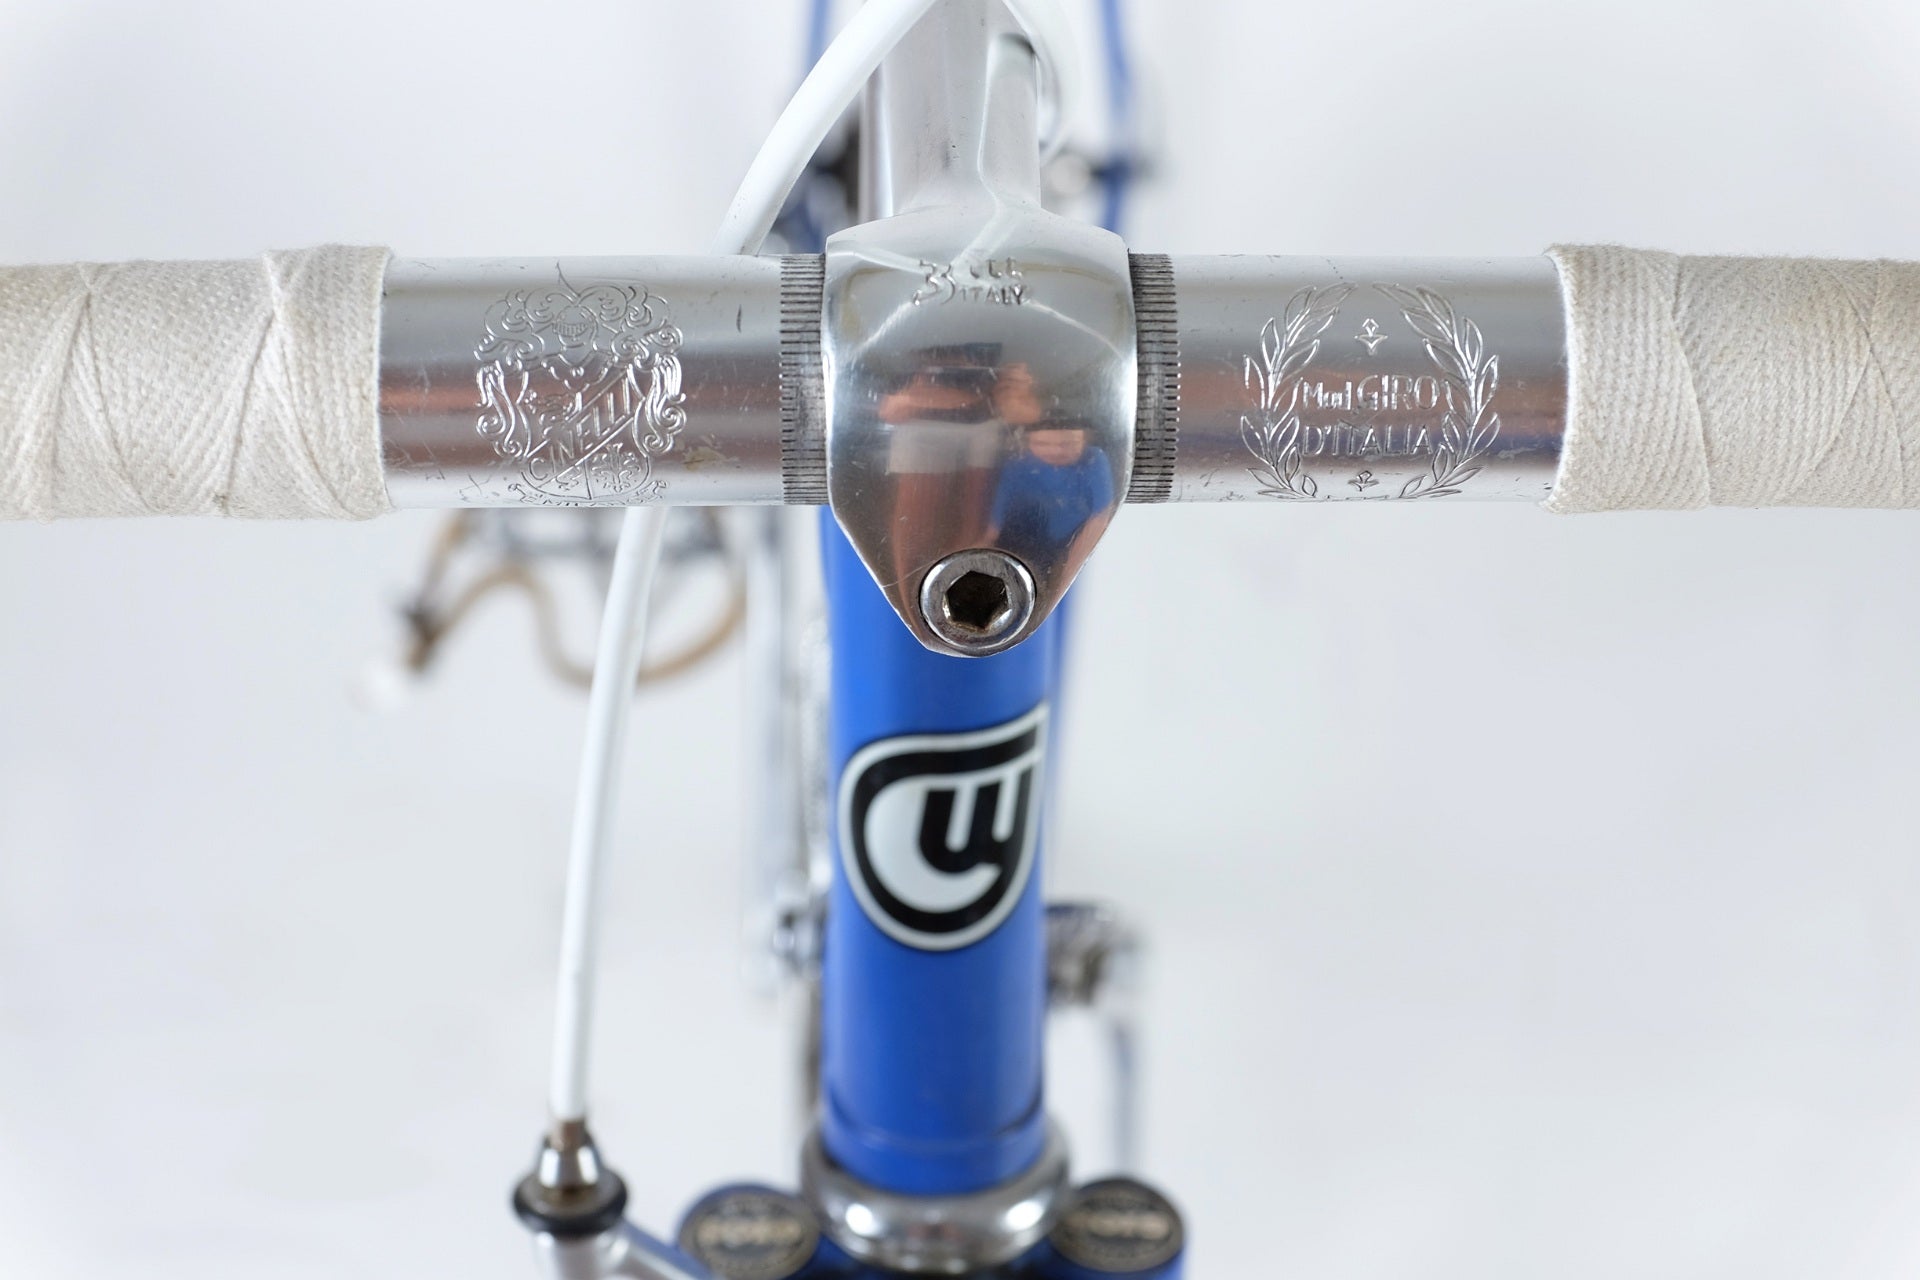 GIOS Torino Super Record - Godefroot